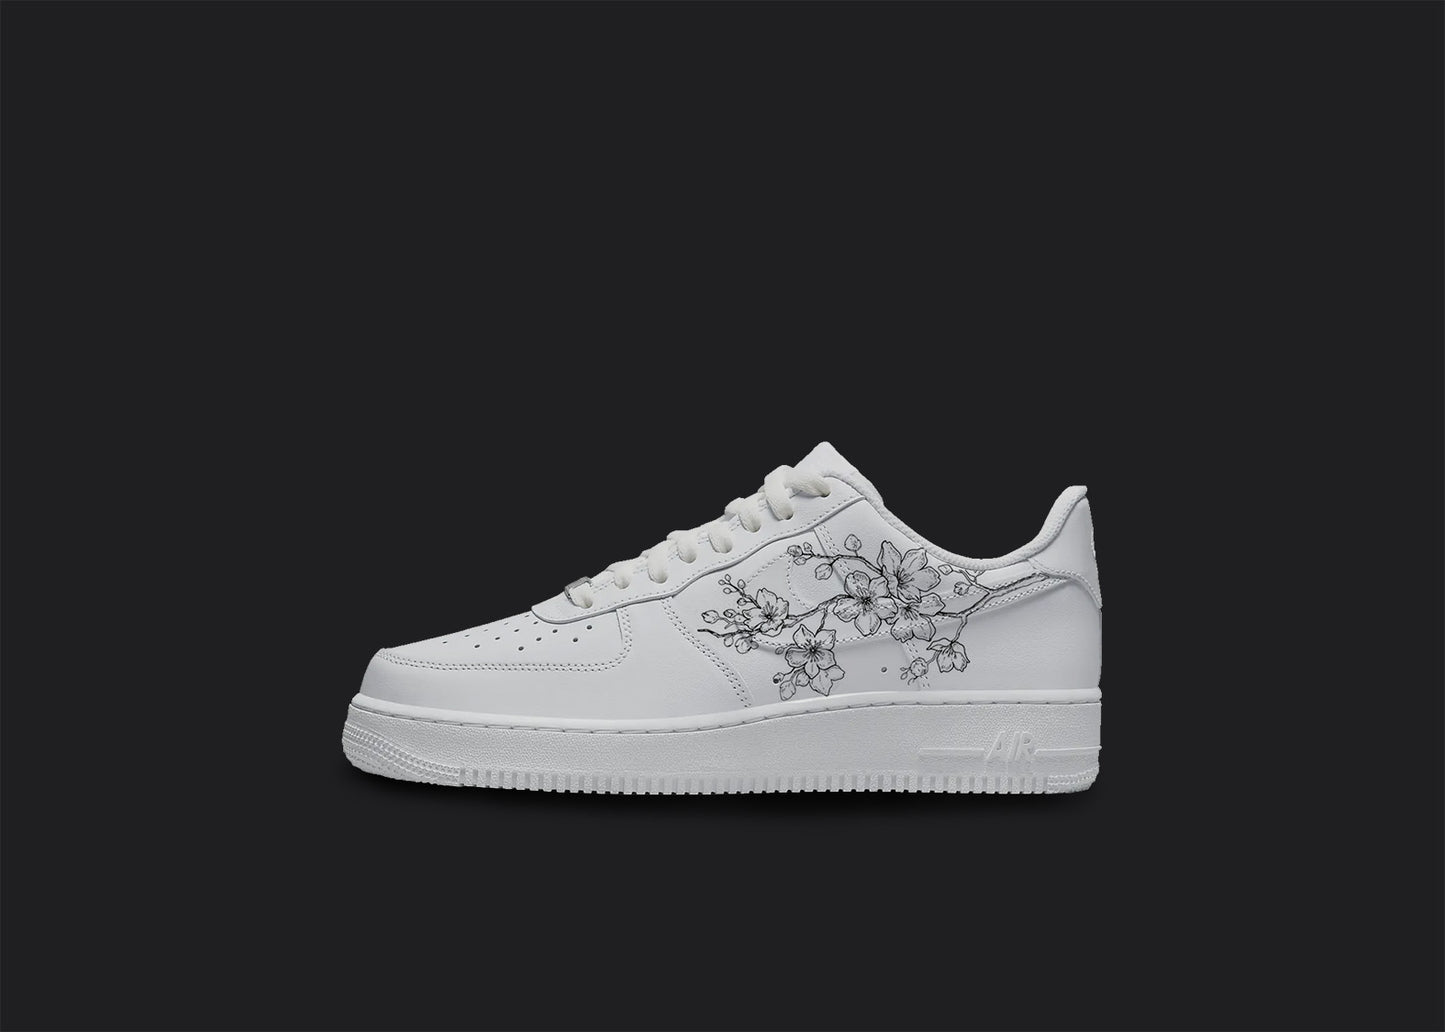 The image is of a Custom Nike Air force 1 sneaker on a blank black background. The white custom sneaker has a floral design on the nike logo.